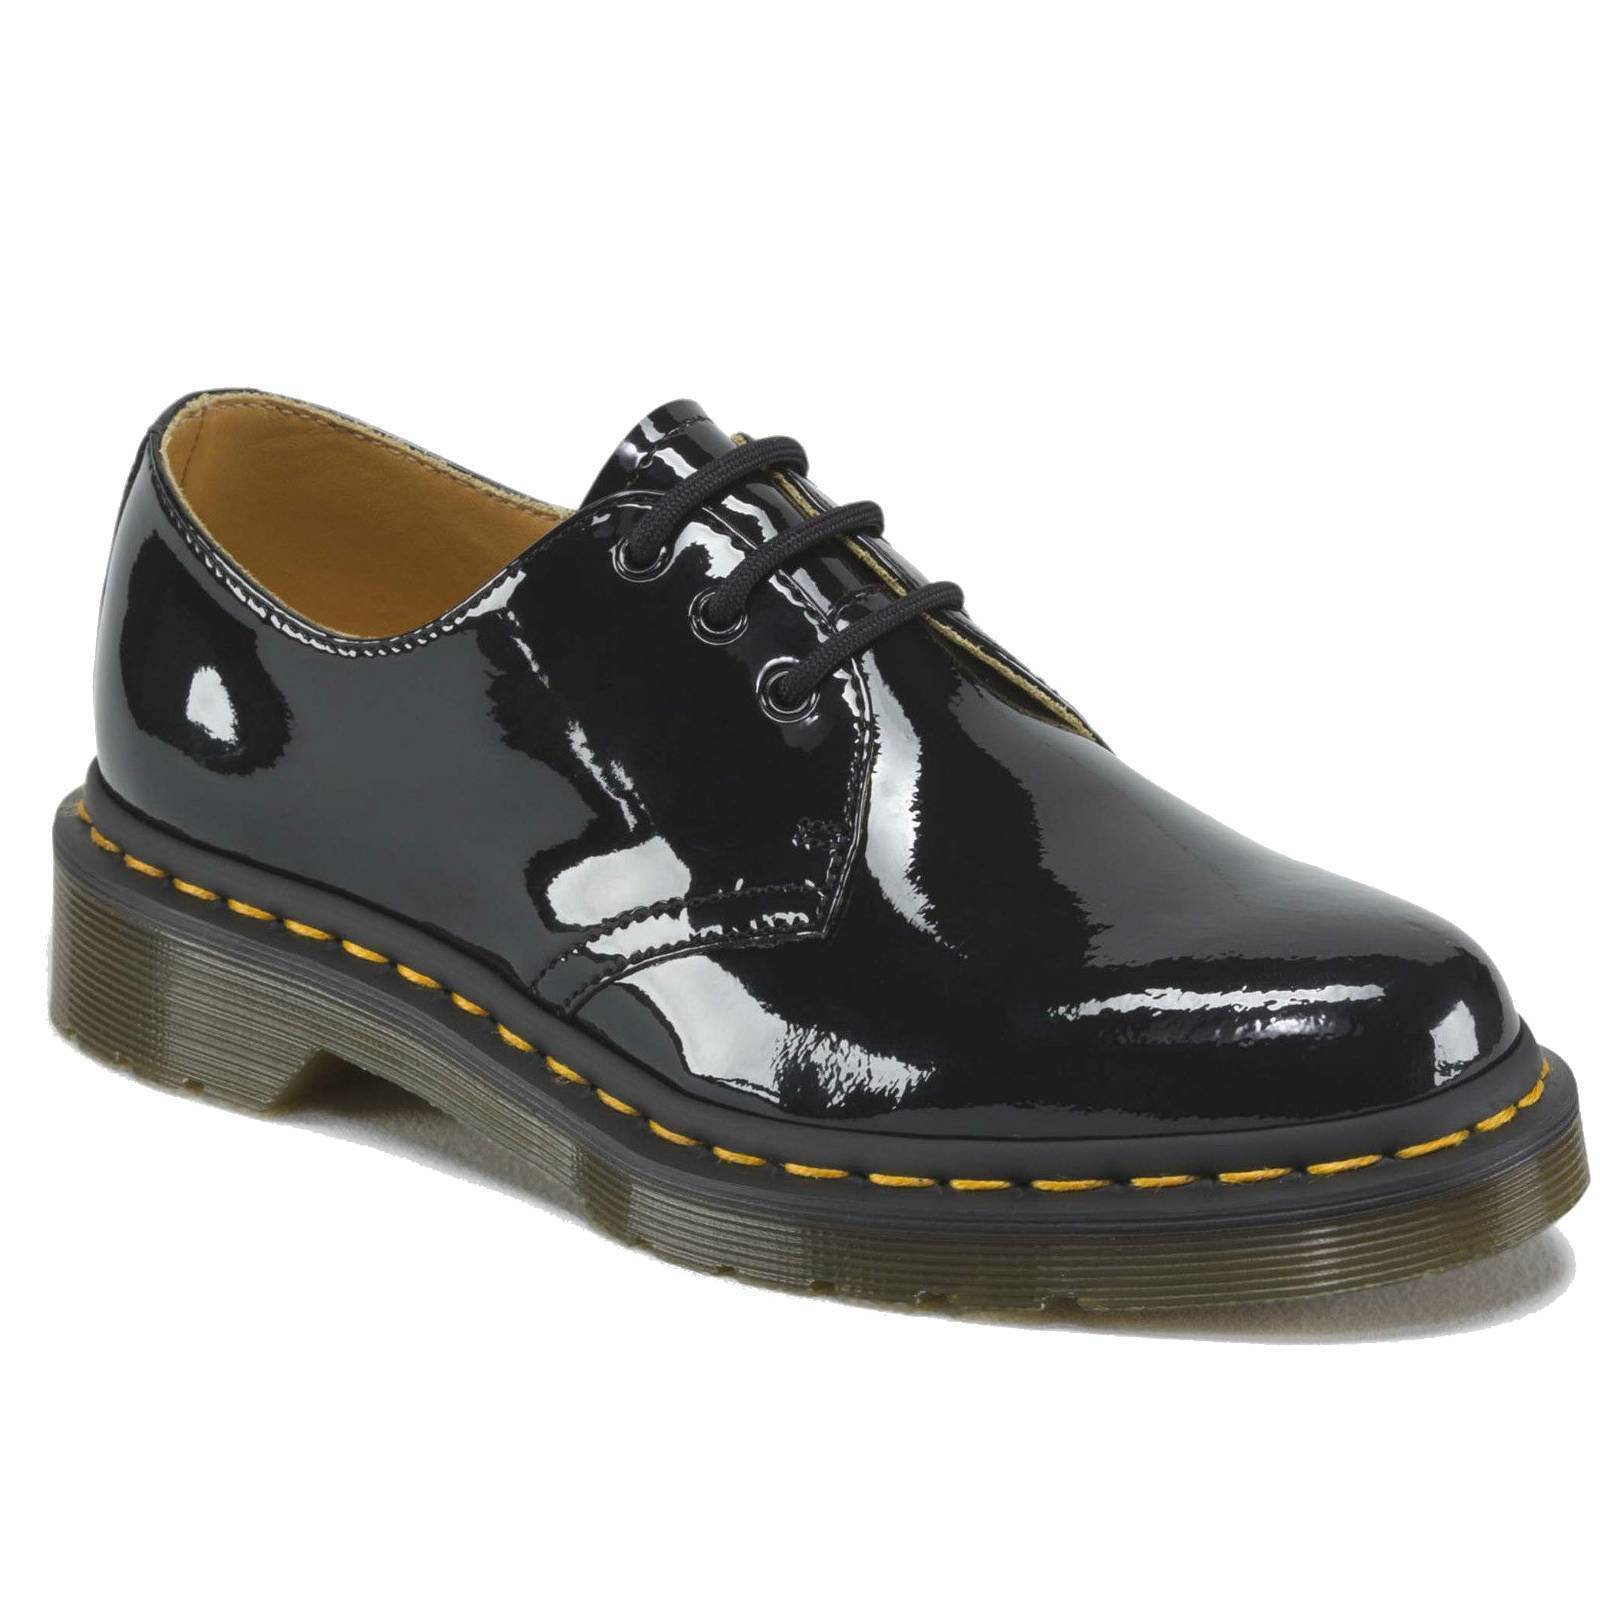 Dr. Martens 1461 Patent 3 Eye Shoes Genuine Leather Ladies Womens Shiny ...